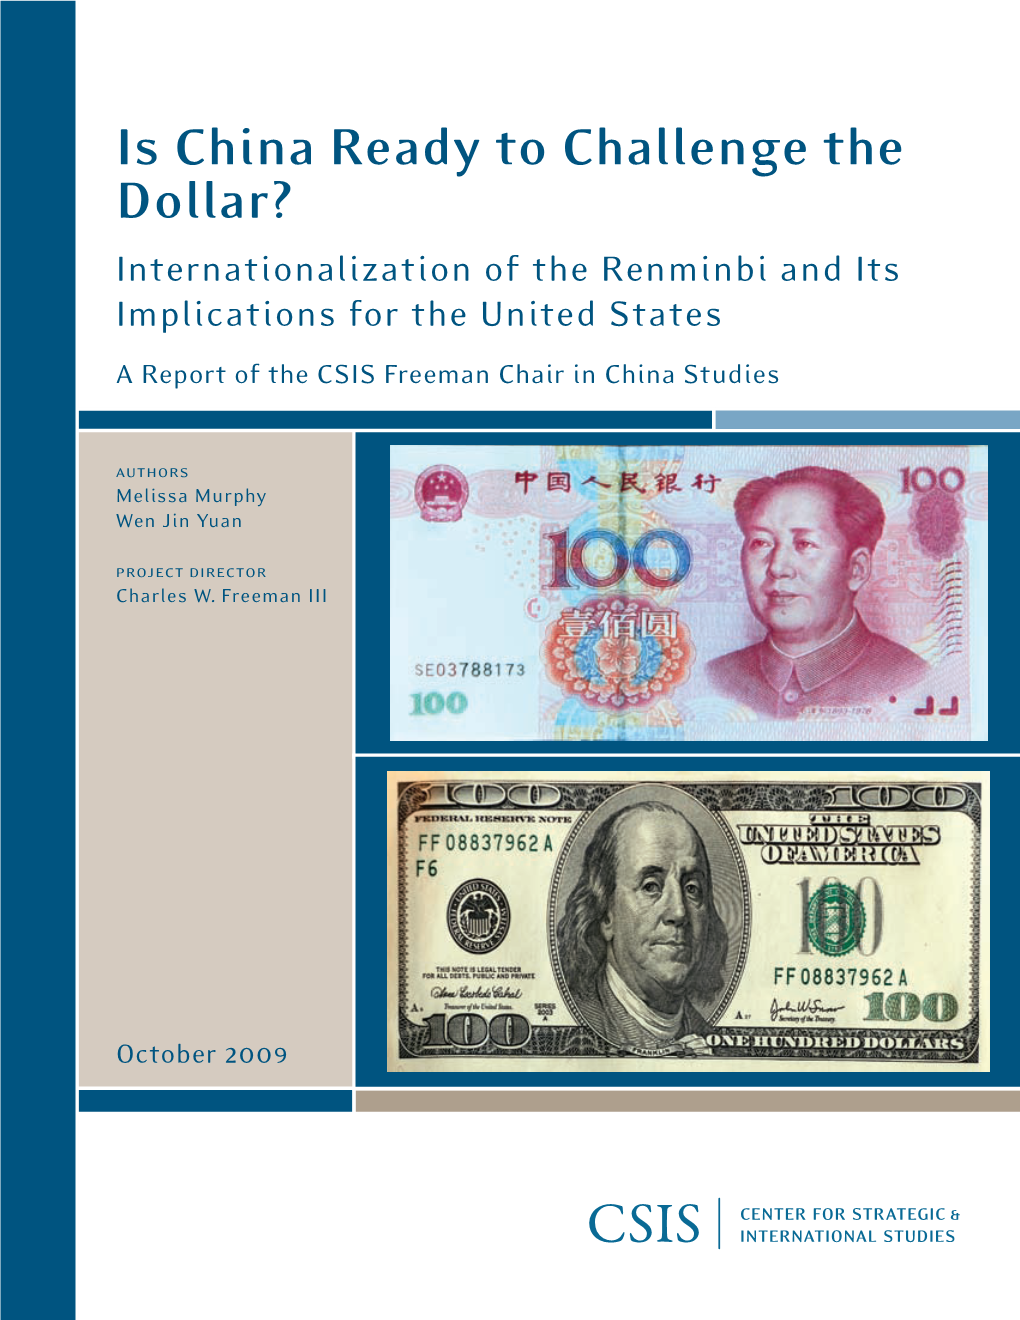 Is China Ready to Challenge the Dollar? Internationalization of the Renminbi and Its